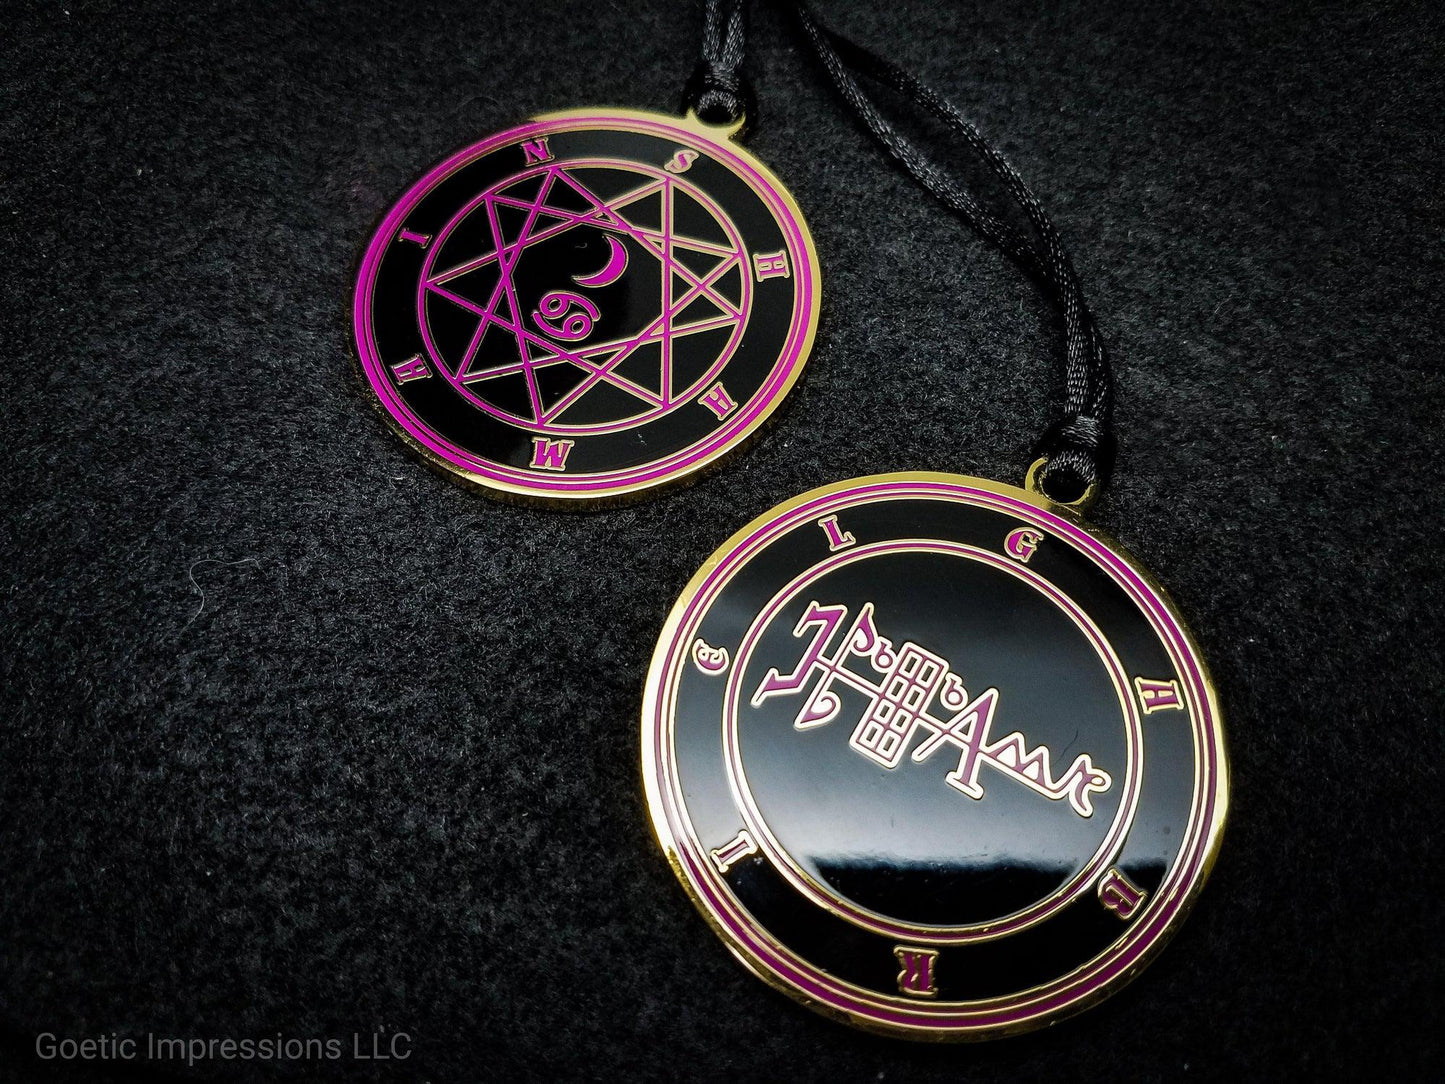 Heptameron Inspired Archangel Pendant featuring the seal and sigils of Archangel Gabriel.  Featuring on the reverse side of the talsiman, the Heaven Shamain and astrological symbols of the Moon and Cancer based on Cornelius Agrippa